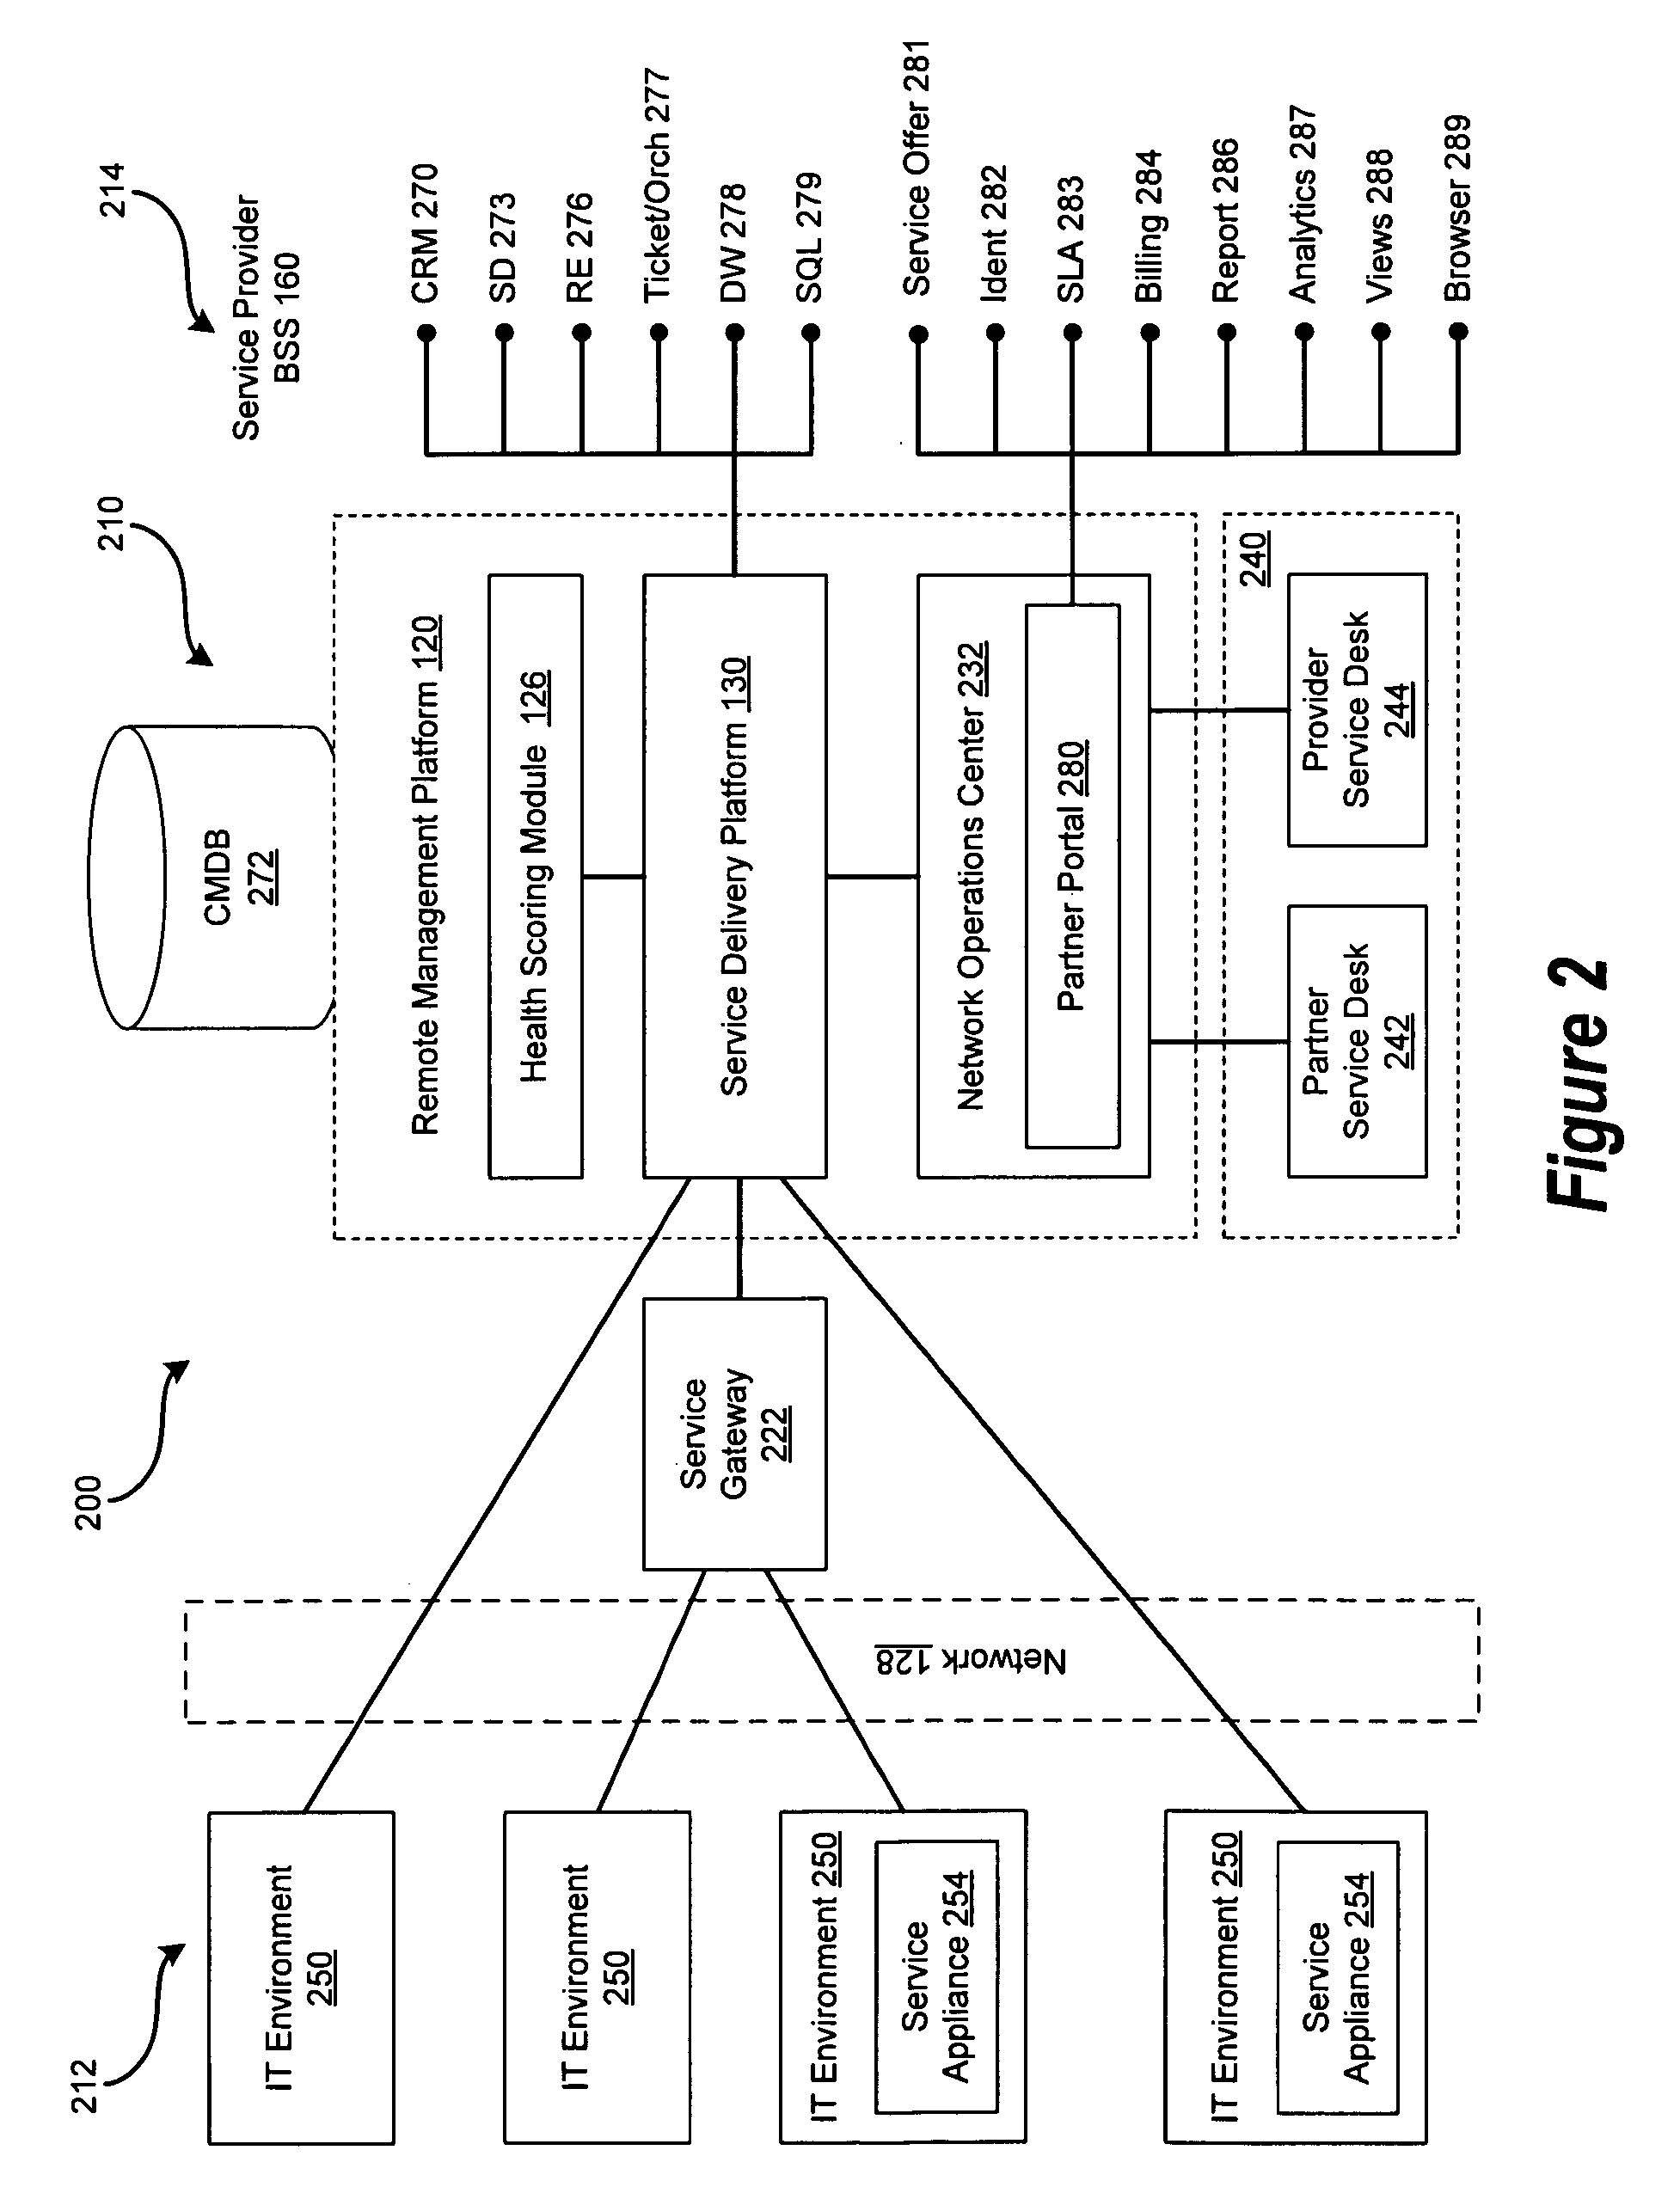 Method and system for health scoring information systems, users, and updates